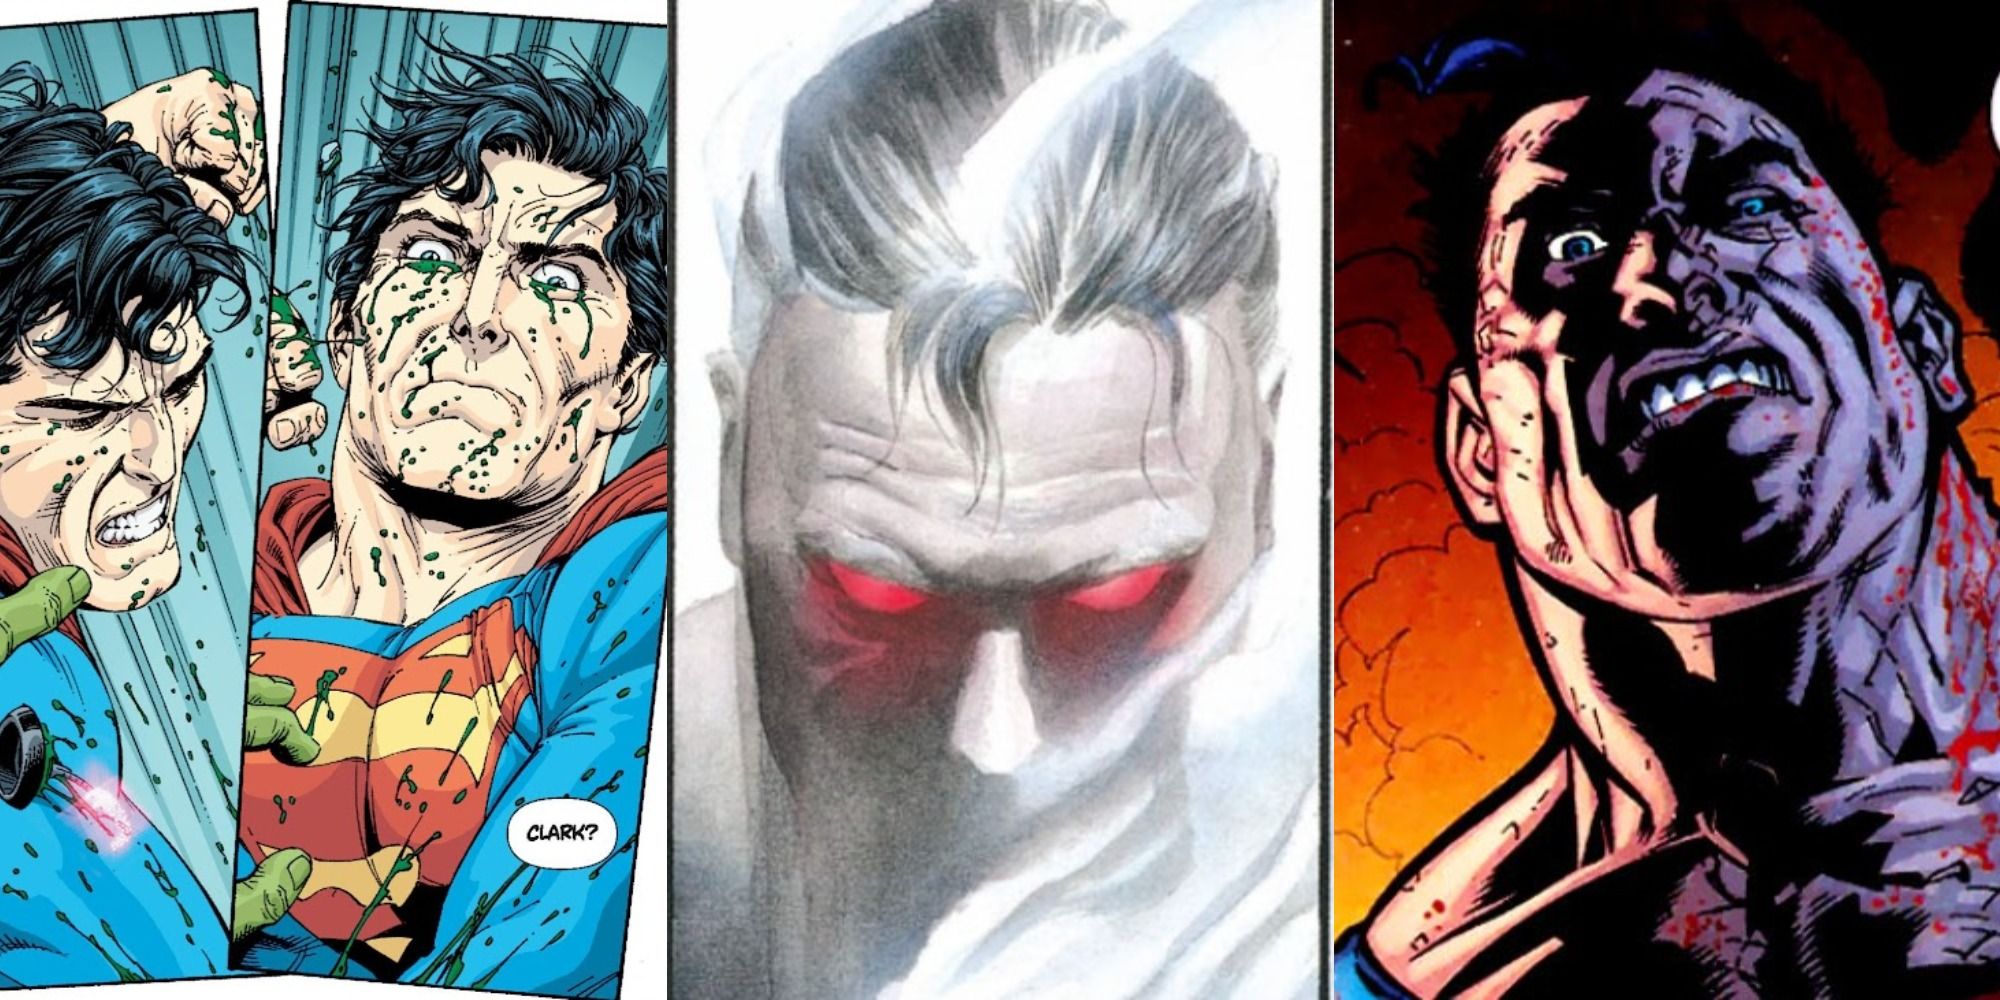 A split image of Superman attacking Brainiac him looking at the ground and Clark looking angry in the DC comics